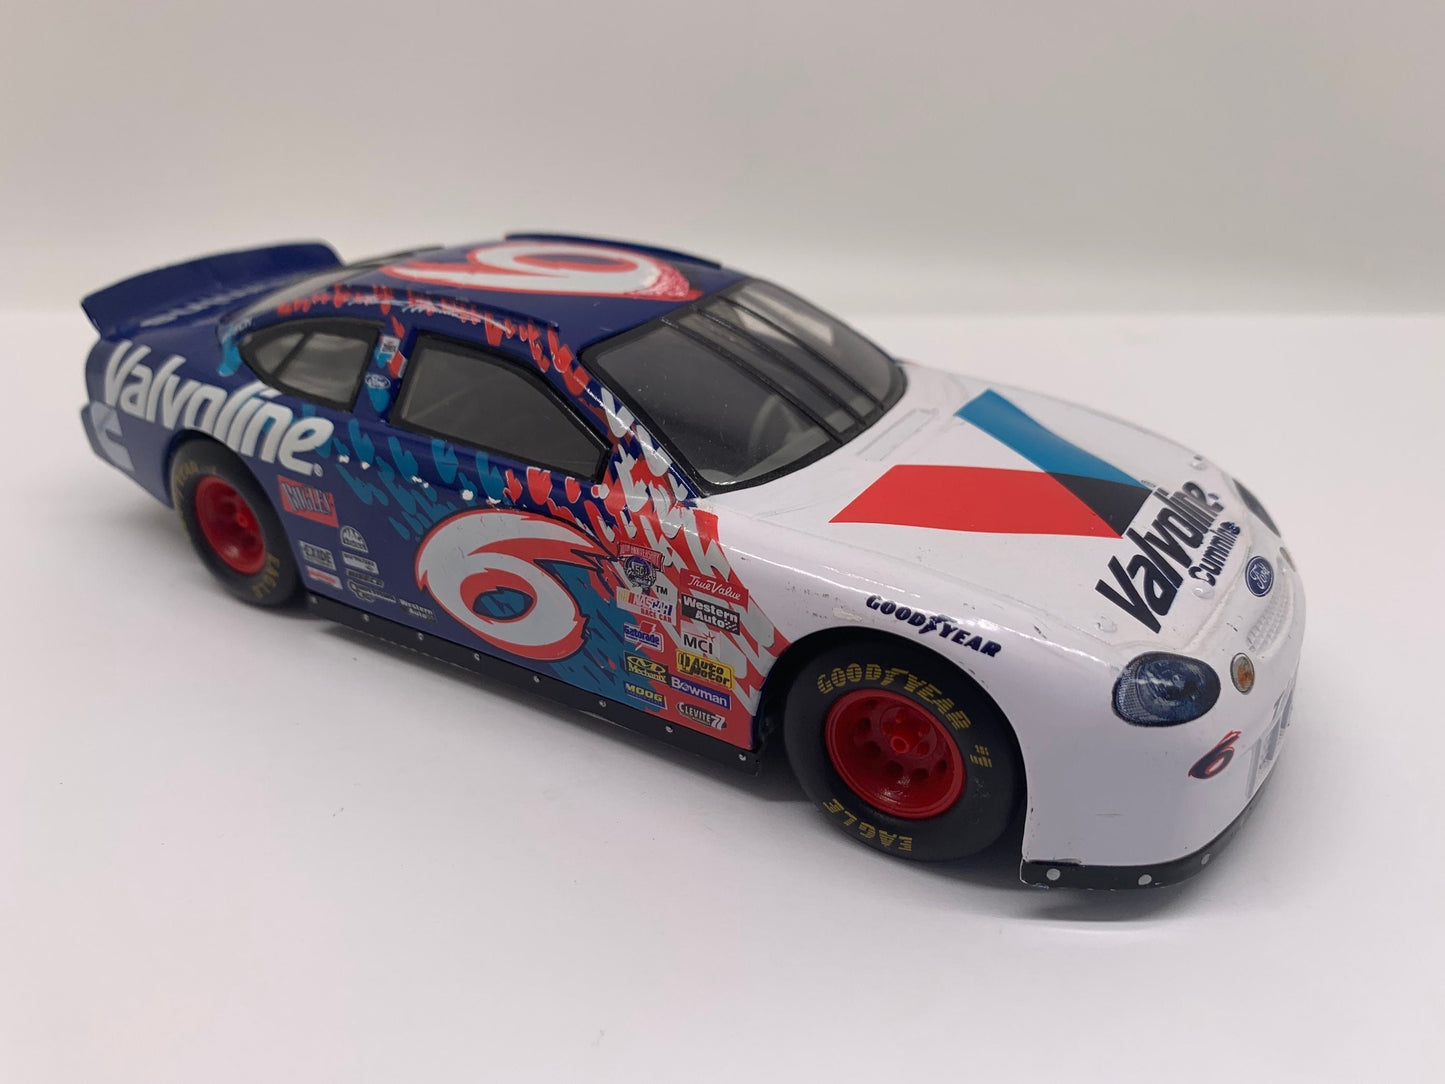 Racing Champions Valvoline Ford Taurus Blue Nascar Perfect Birthday Gift Collectable Model Toy Car